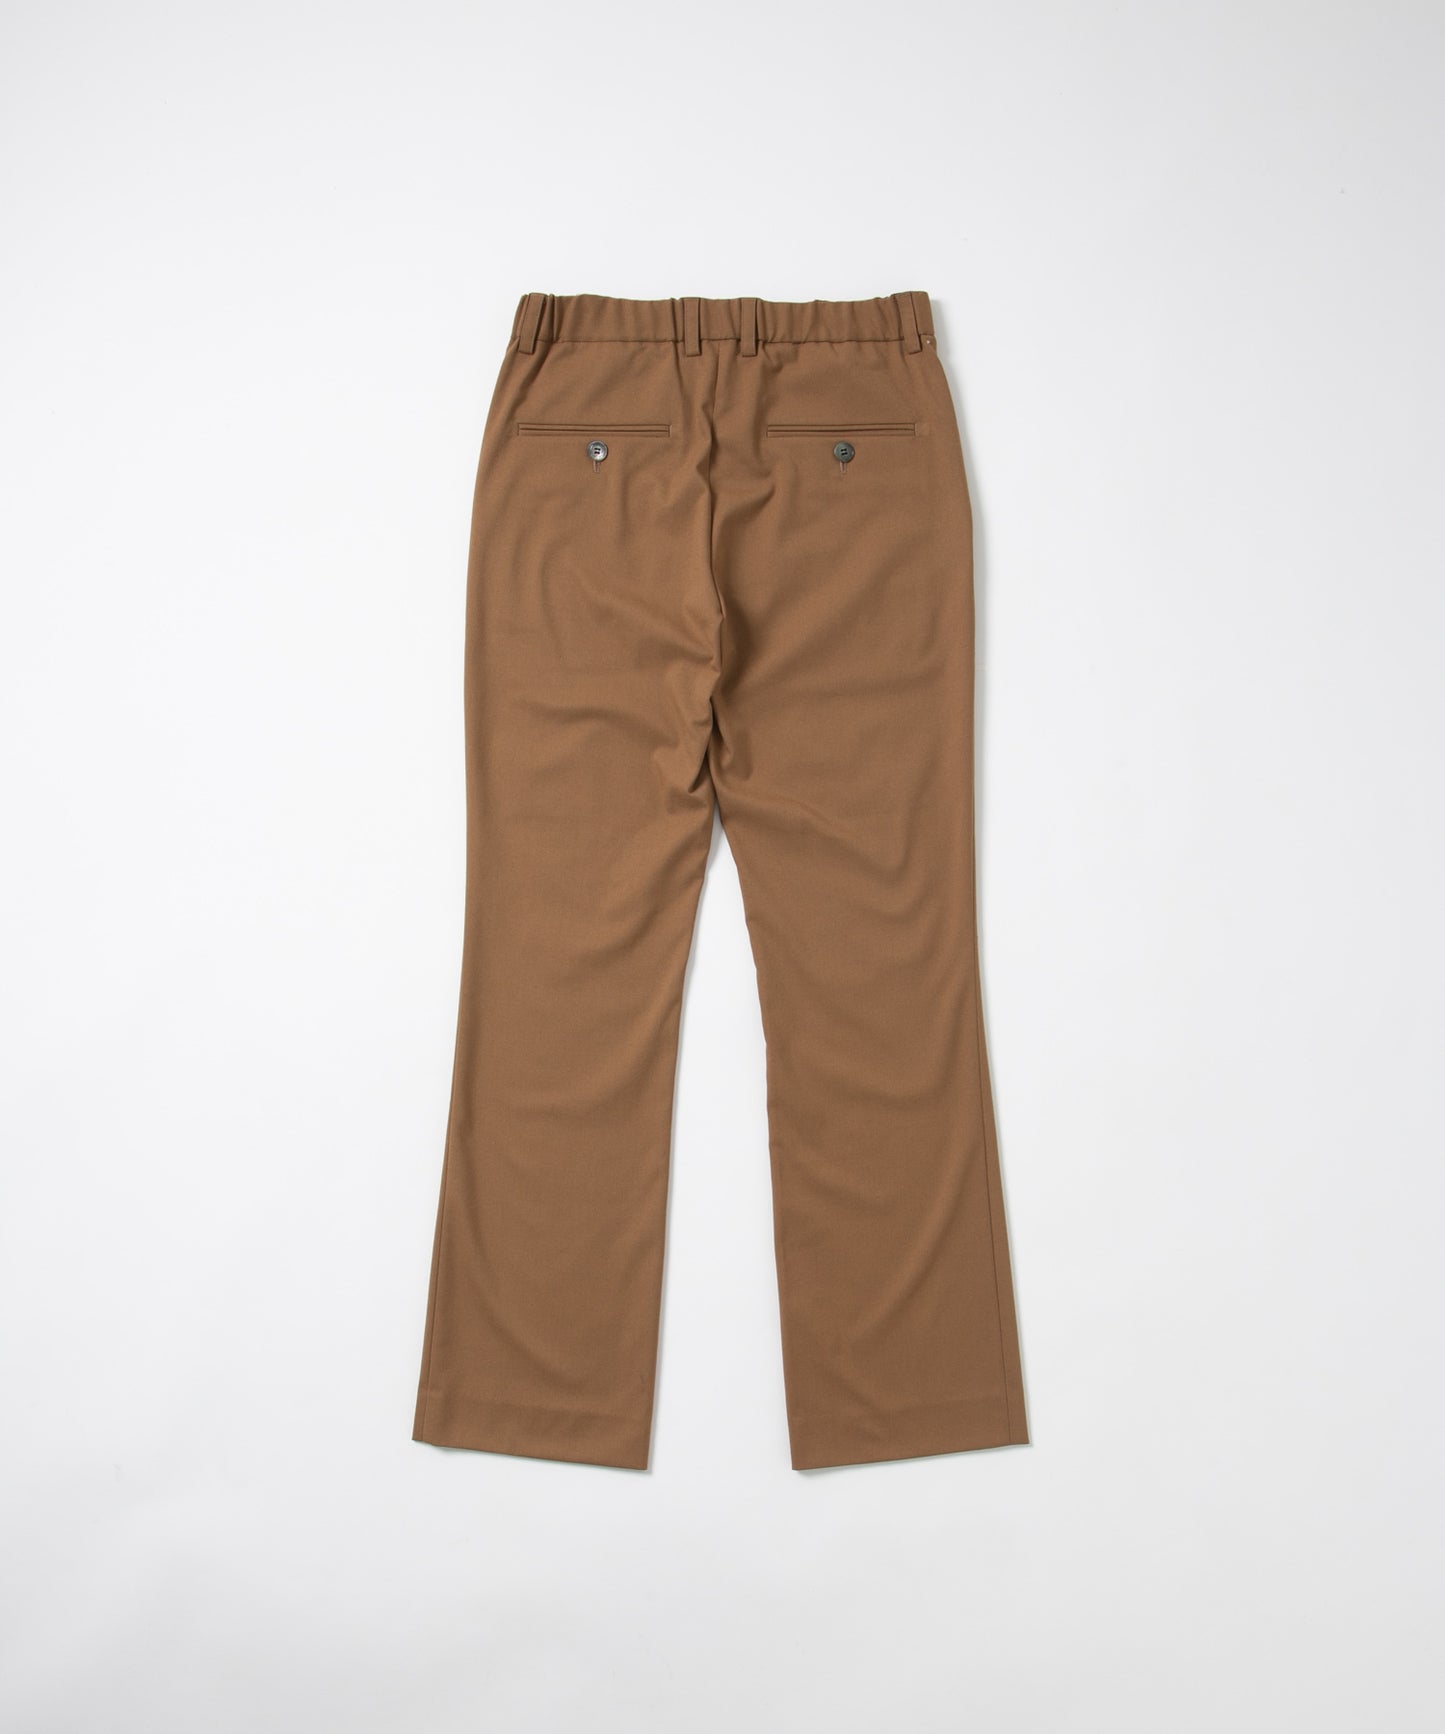 TR flared Pants